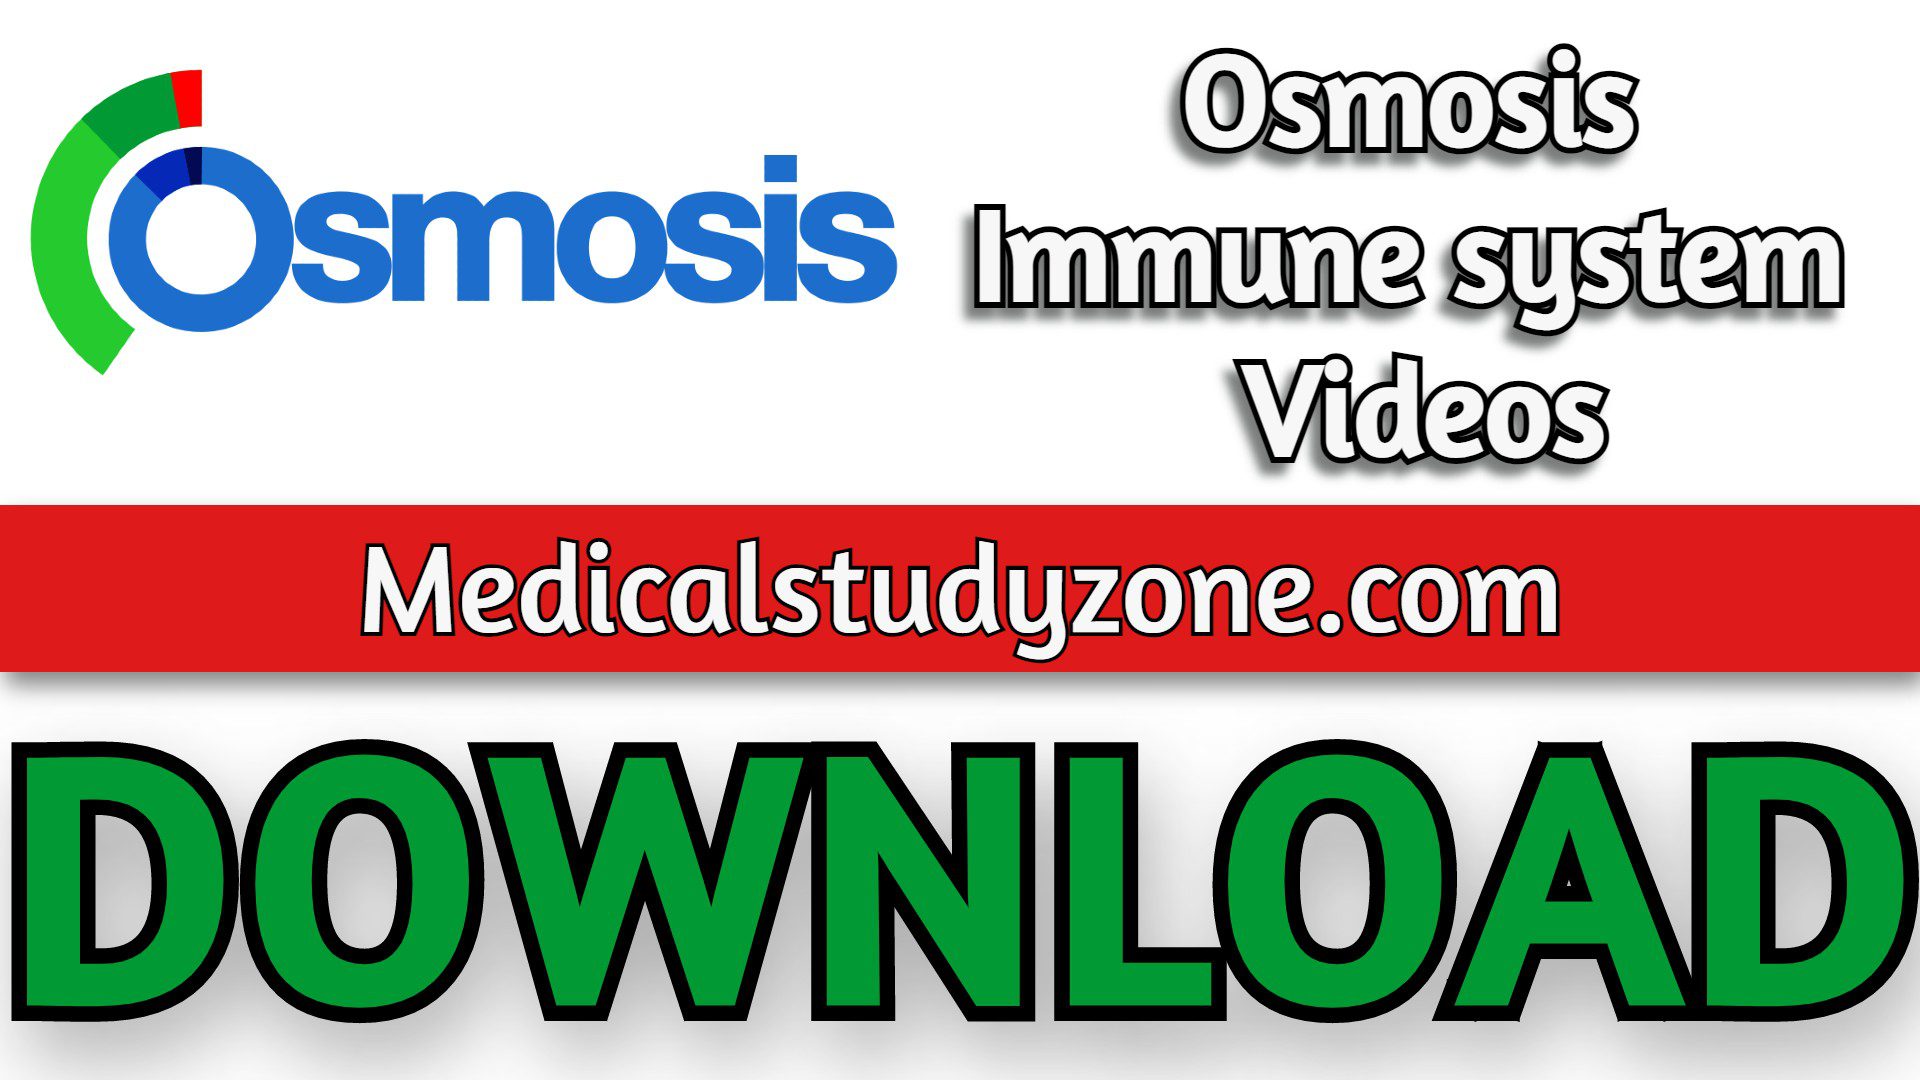 Osmosis Immune system Videos 2023 Free Download